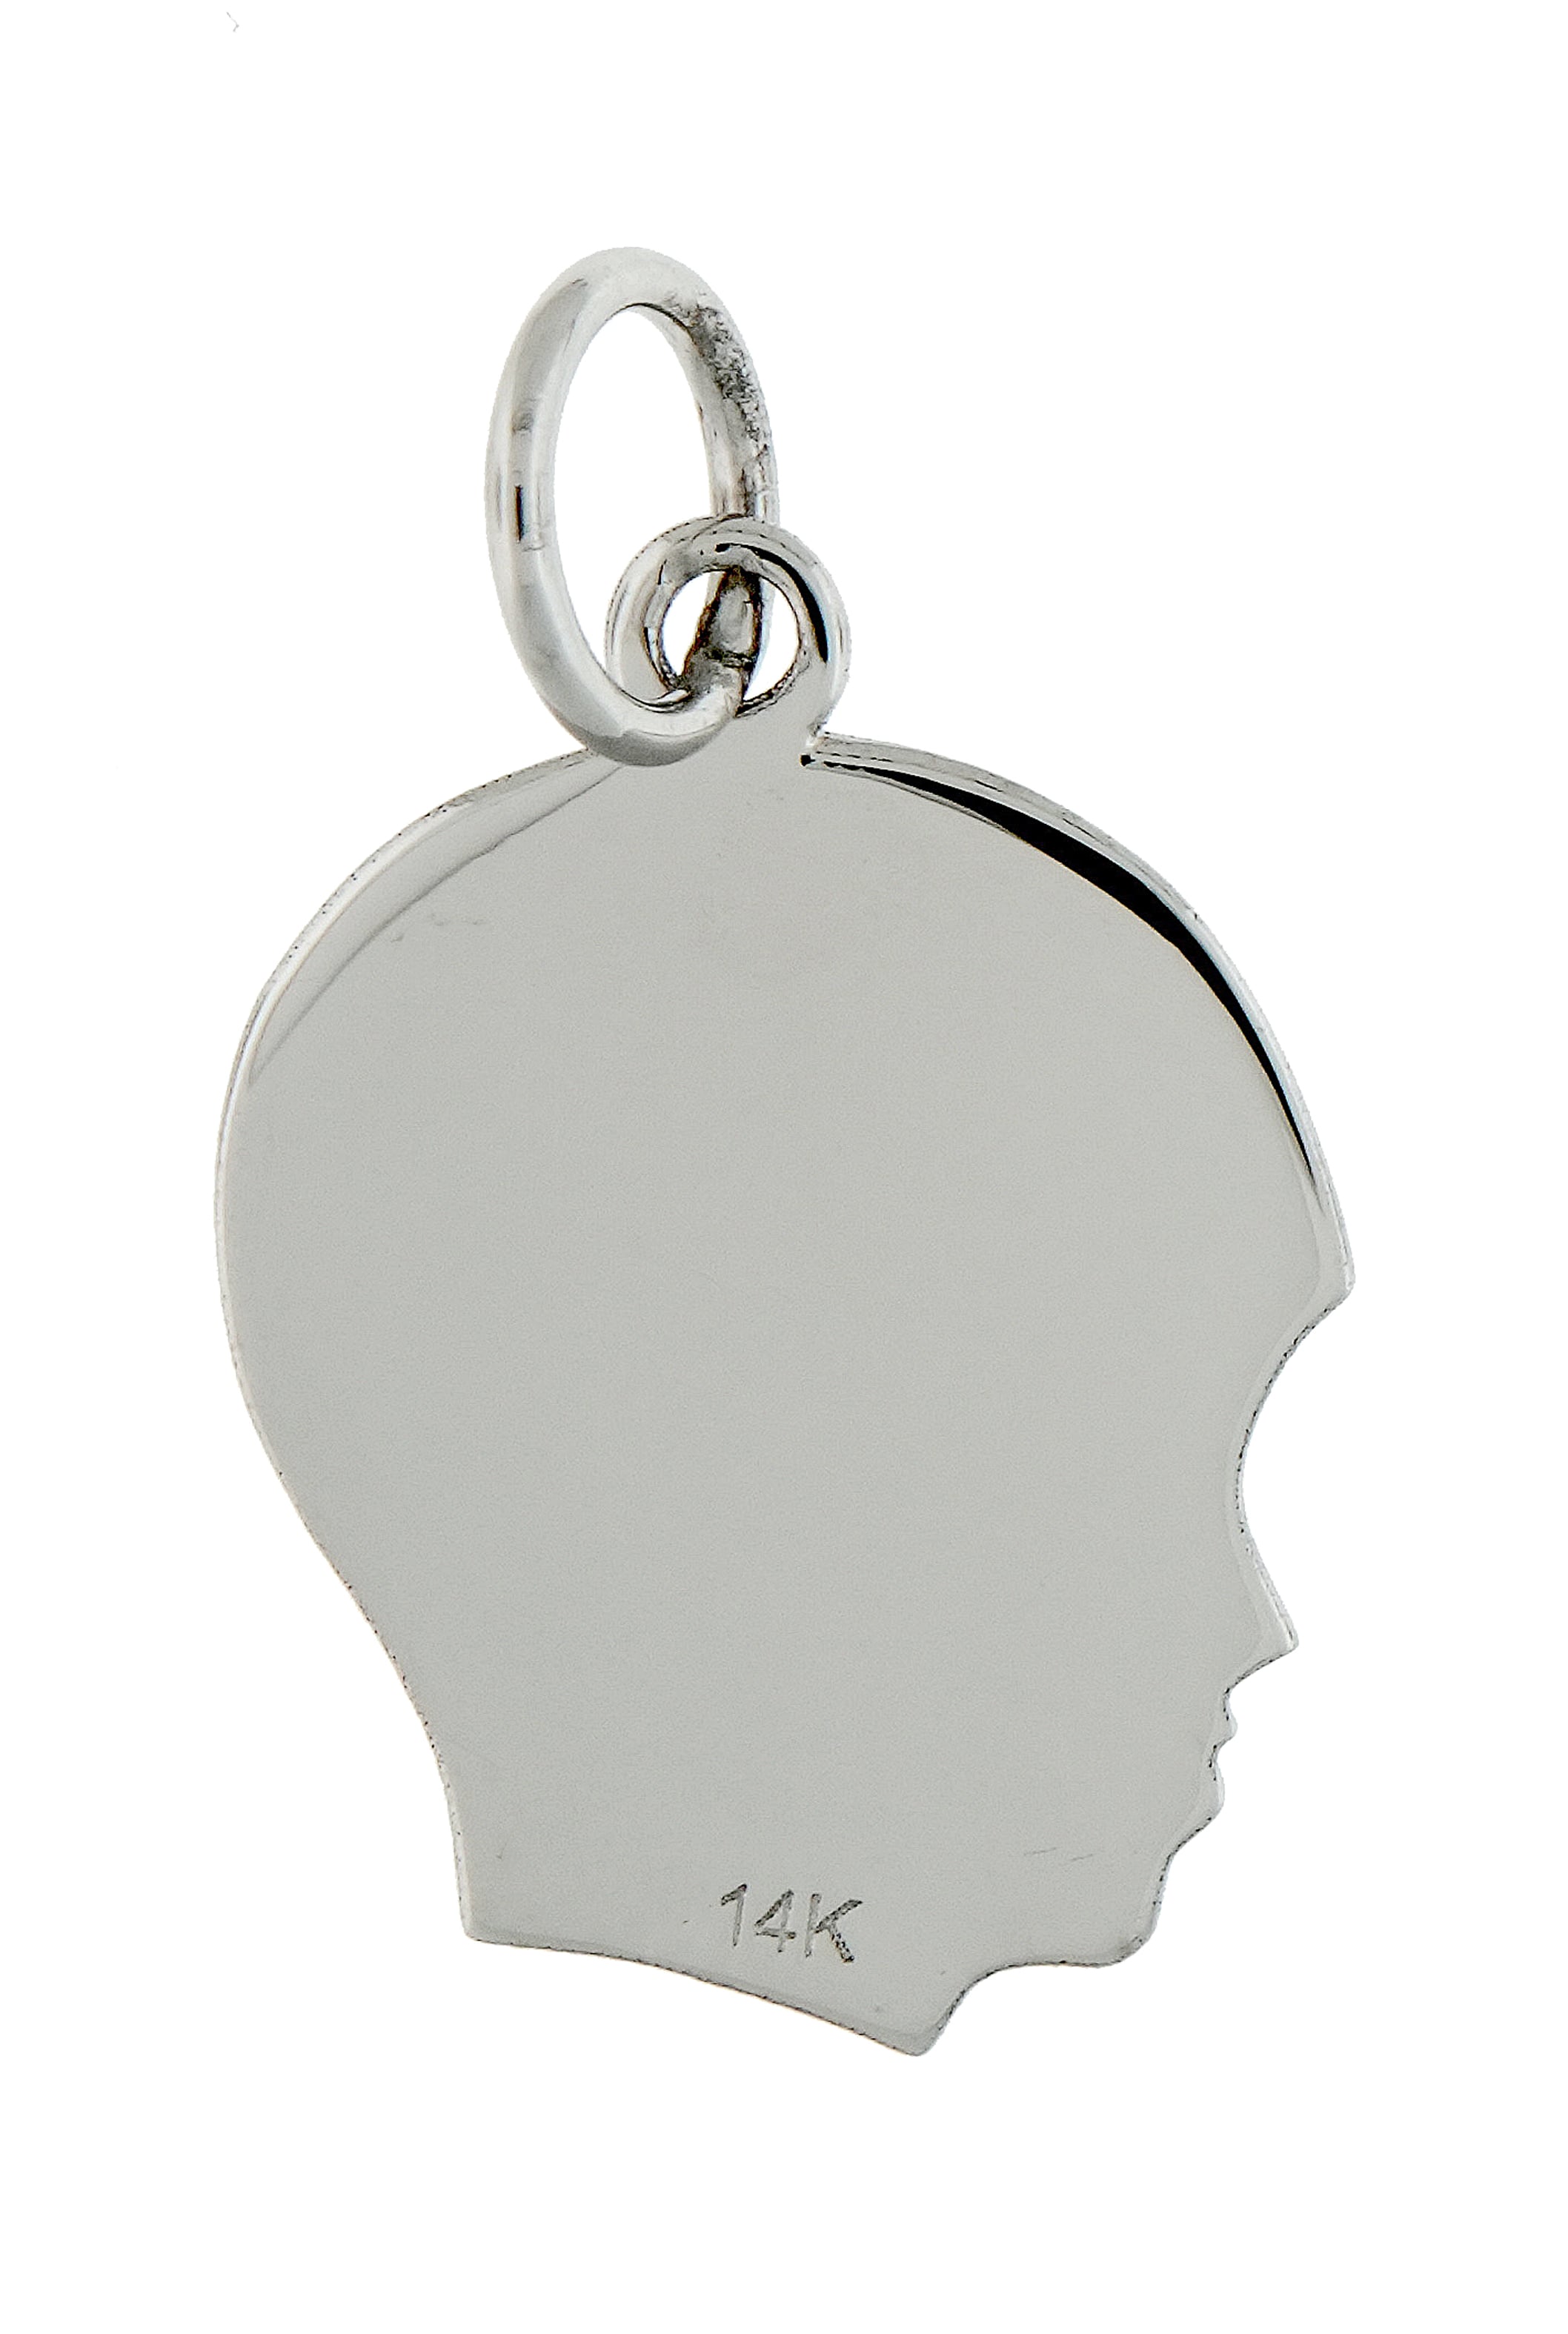 14k White Gold 13mm Boy Head Silhouette Disc Pendant Charm Engraved Personalized